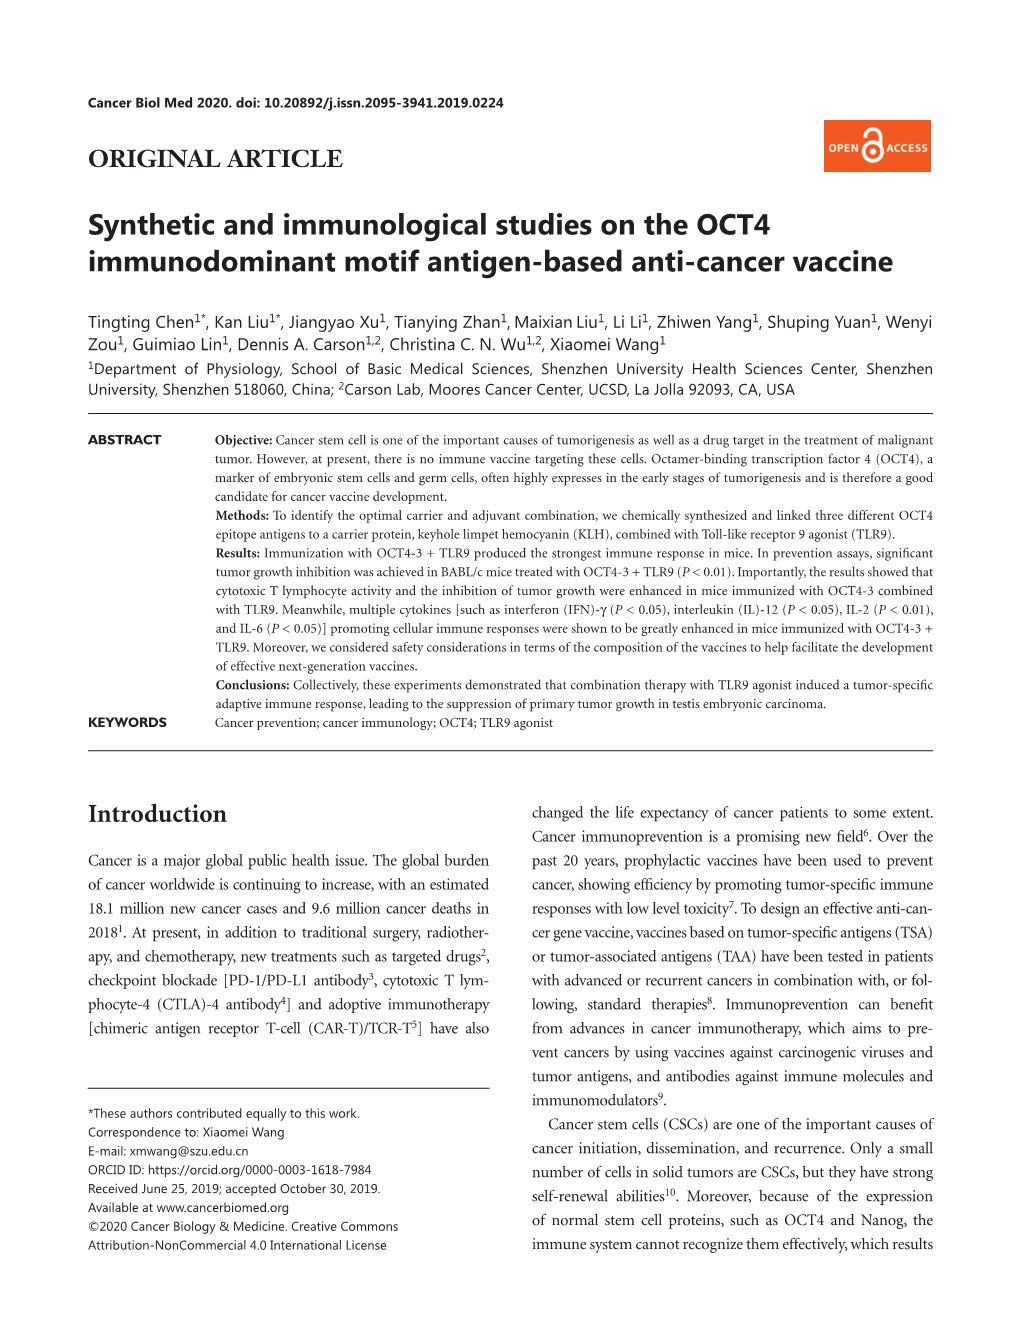 Synthetic and Immunological Studies on the OCT4 Immunodominant Motif Antigen-Based Anti-Cancer Vaccine